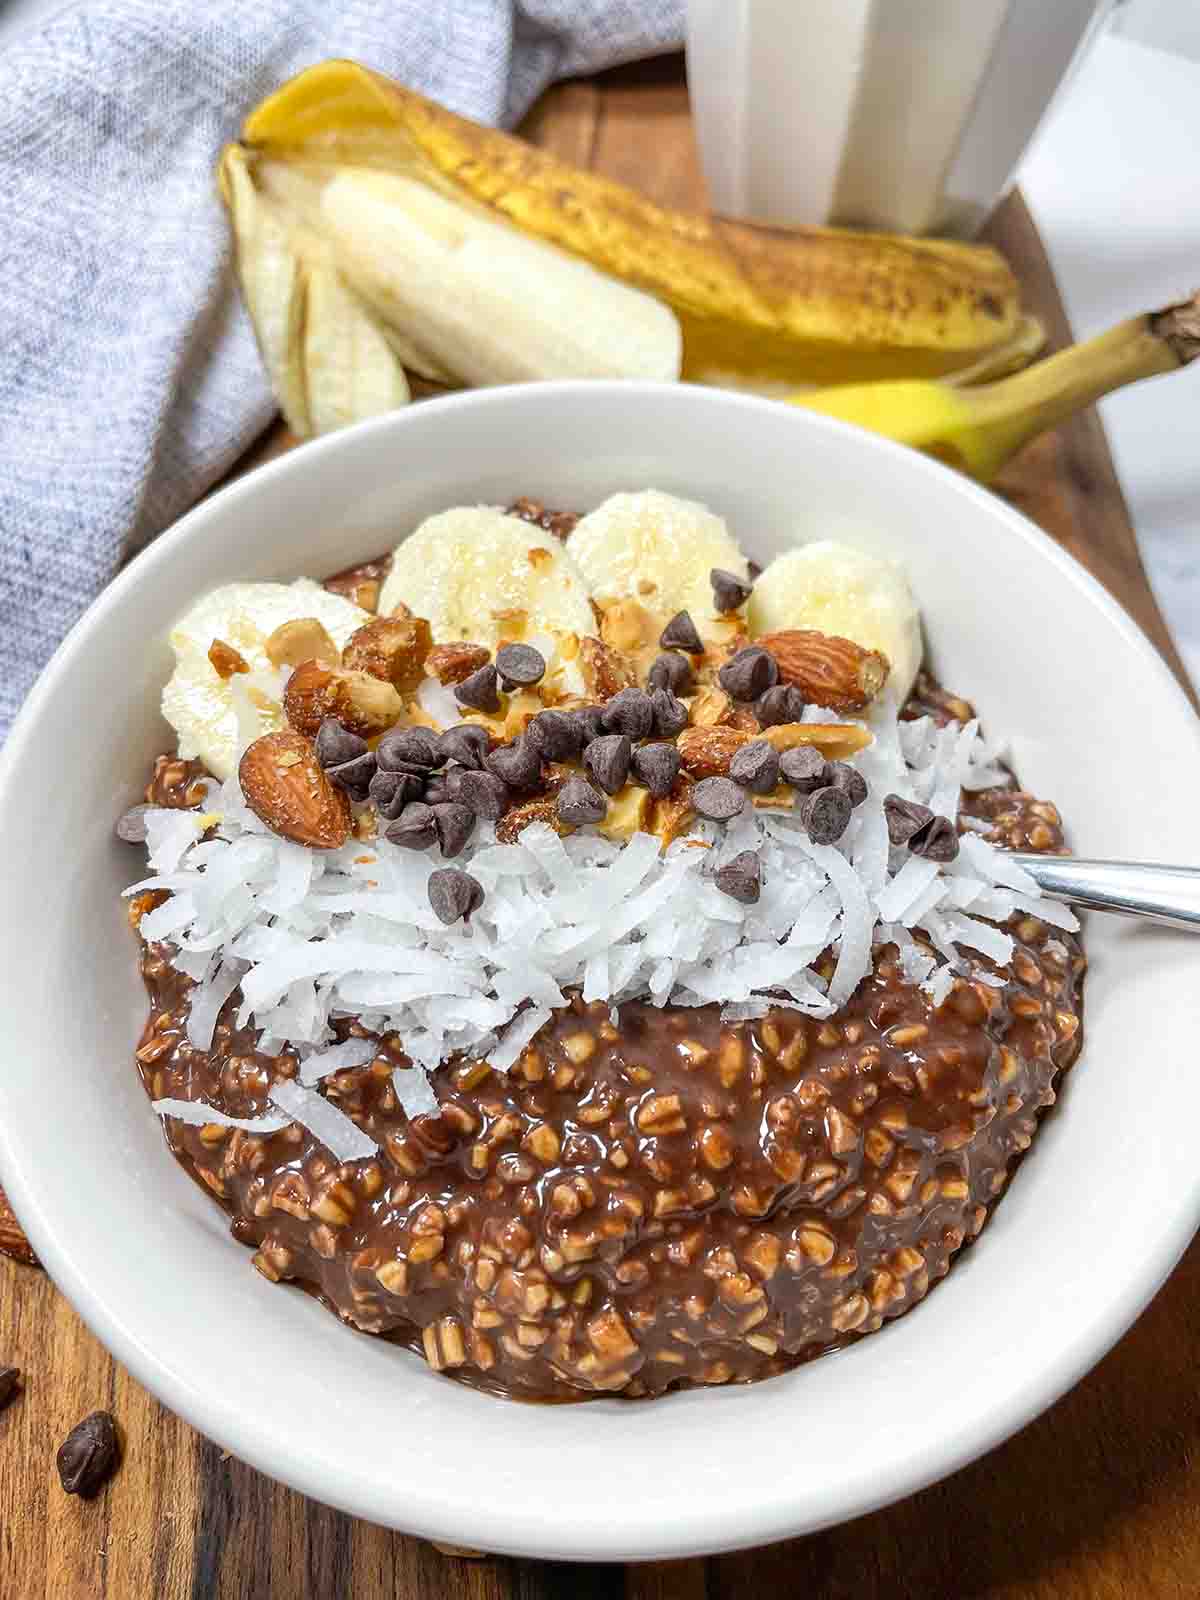 Chocolate Banana Overnight Oats with almonds, bananas, coconut, and mini chocolate chips